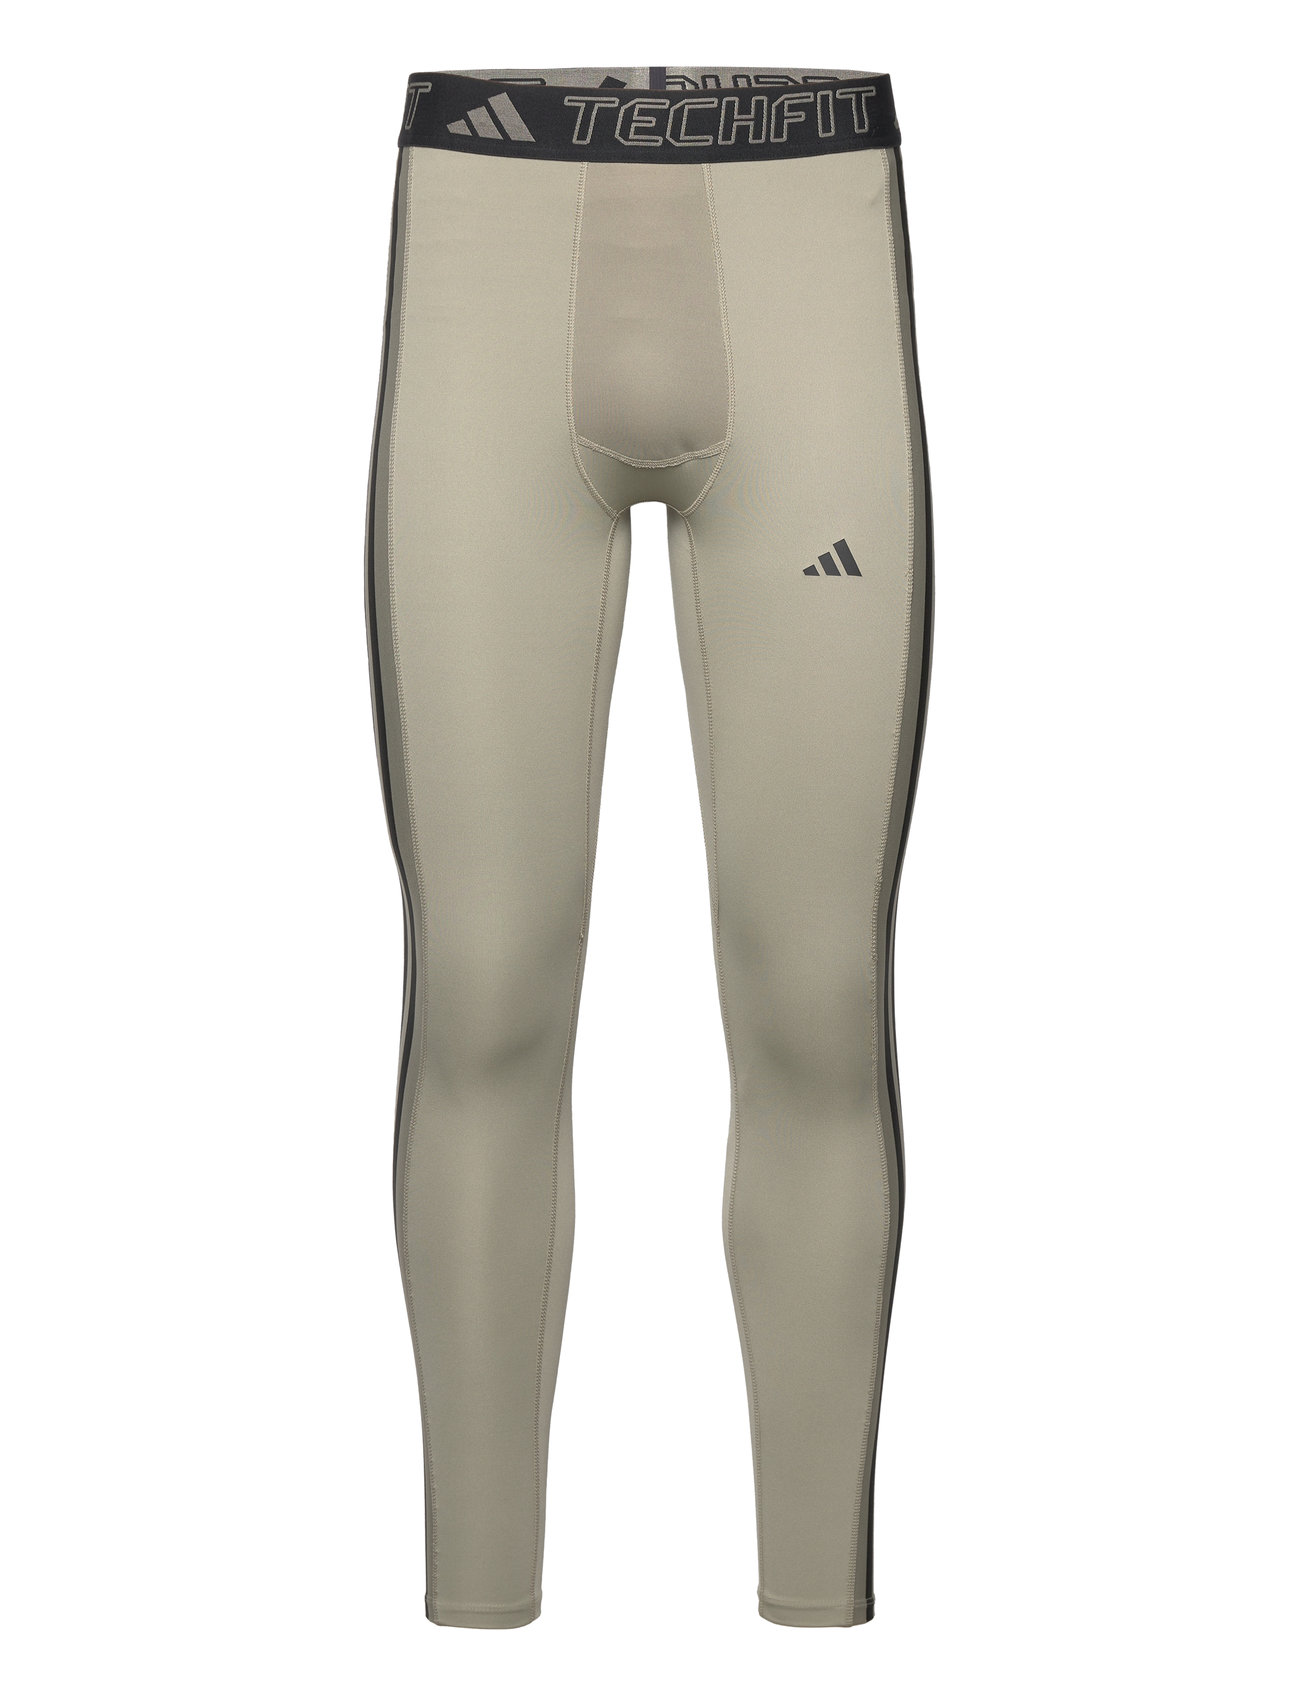 Tf 3S L Tight Sport Base Layer Bottoms Beige Adidas Performance